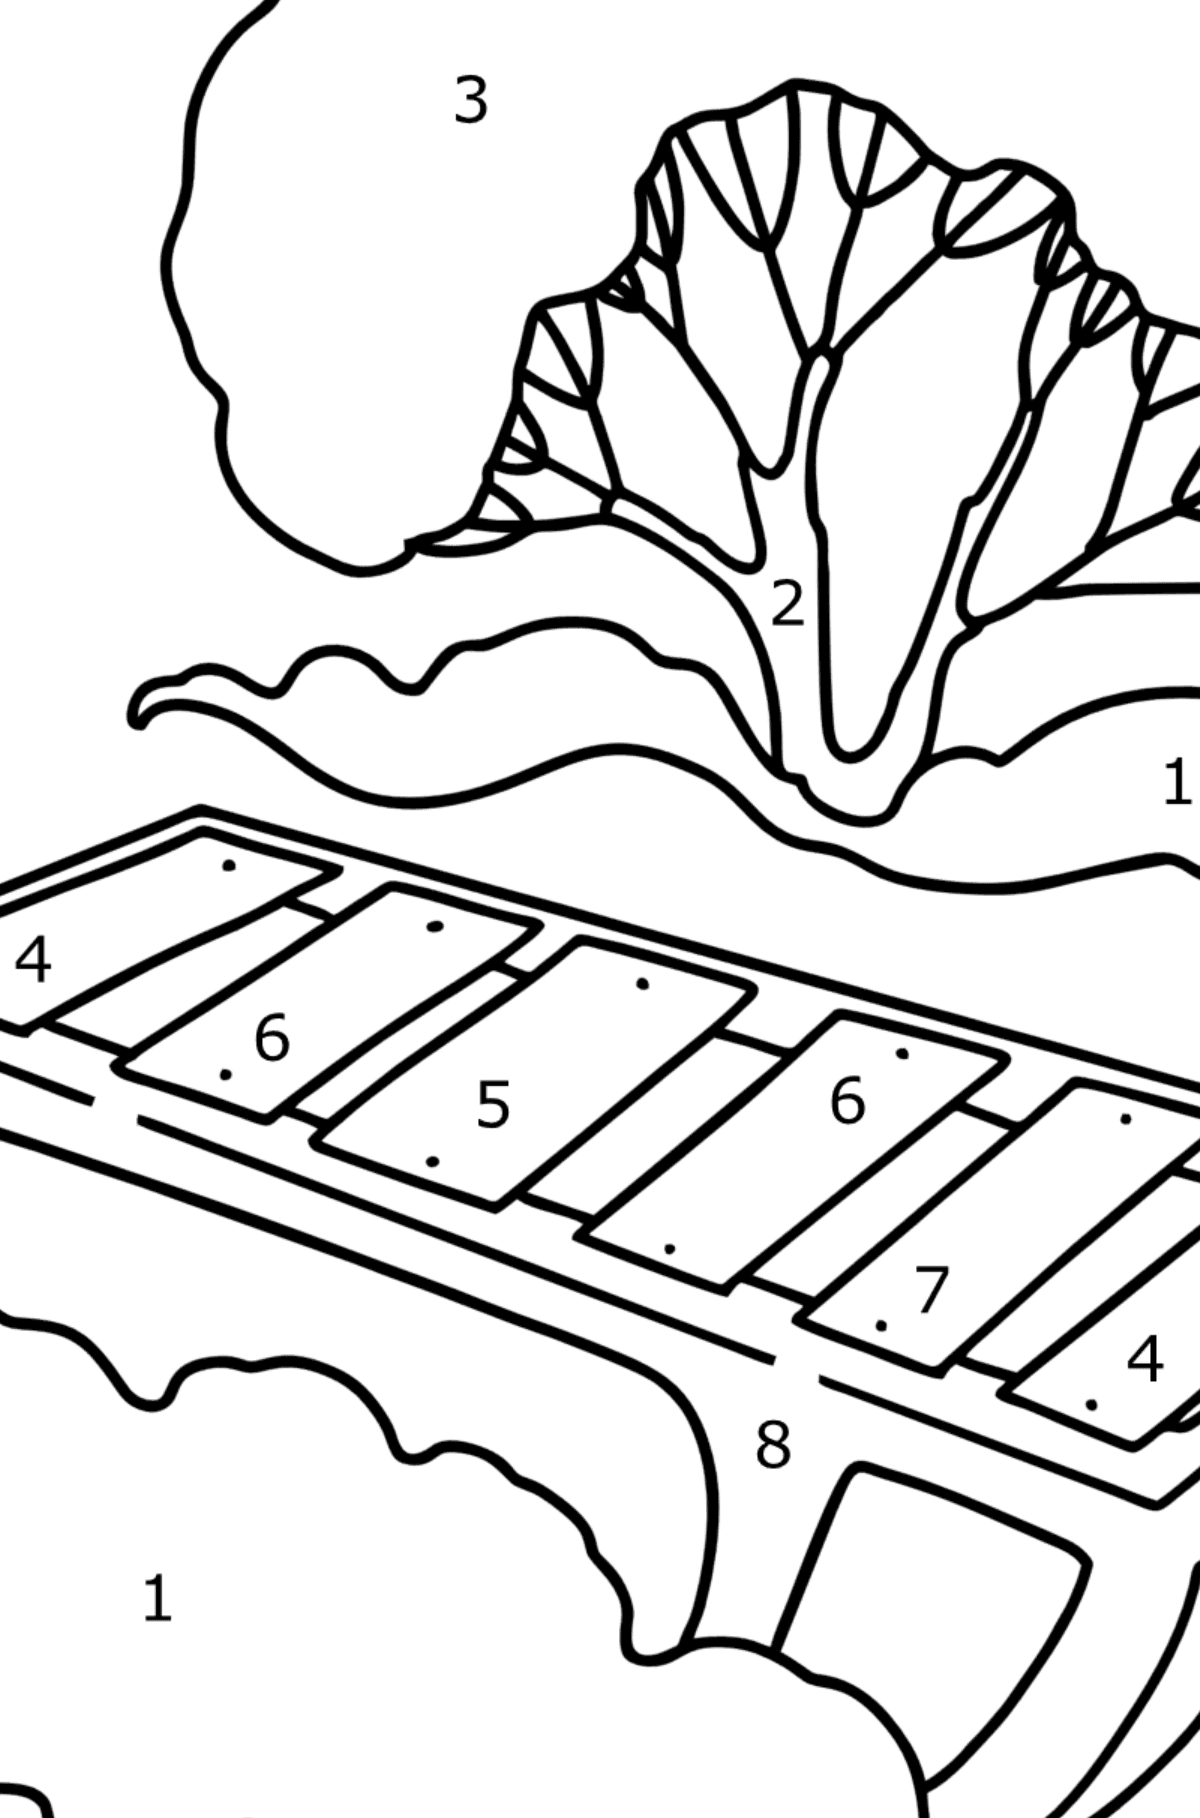 Coloring page - Sled for Kids - Coloring by Numbers for Kids